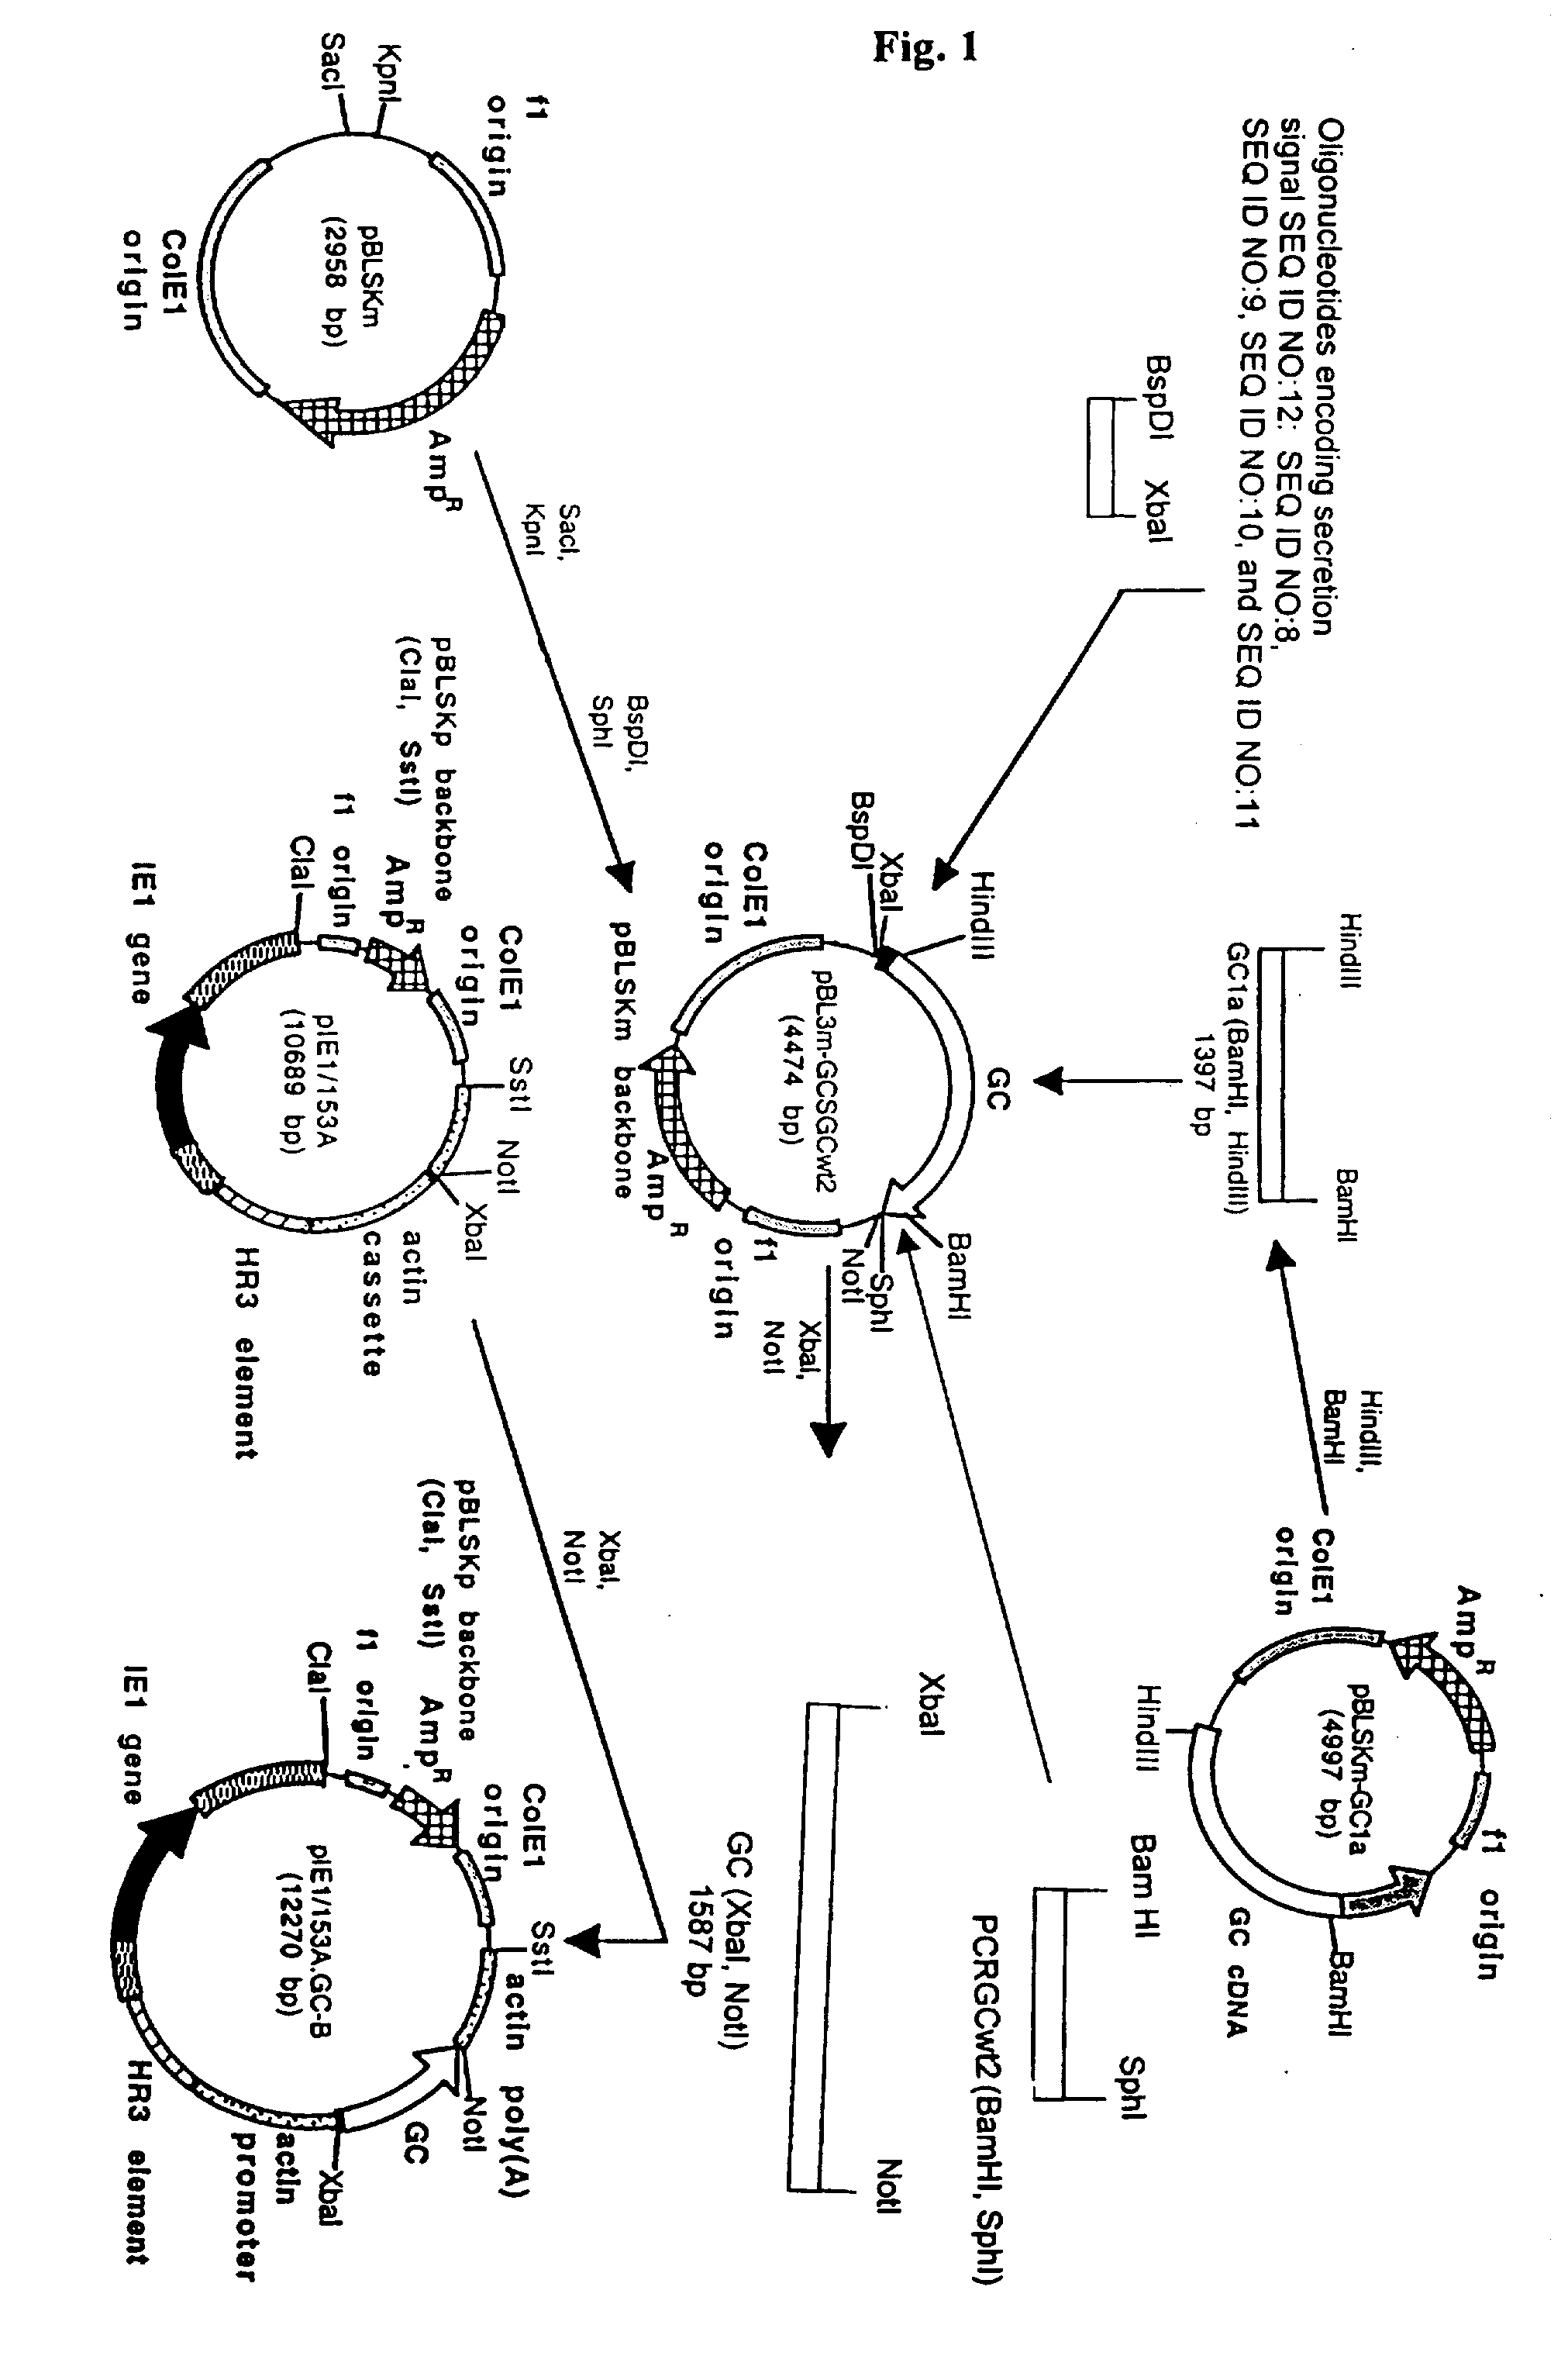 Expression system for effeiciently producing clinically effective lysosomal enzymes (glucocerebrosidase)